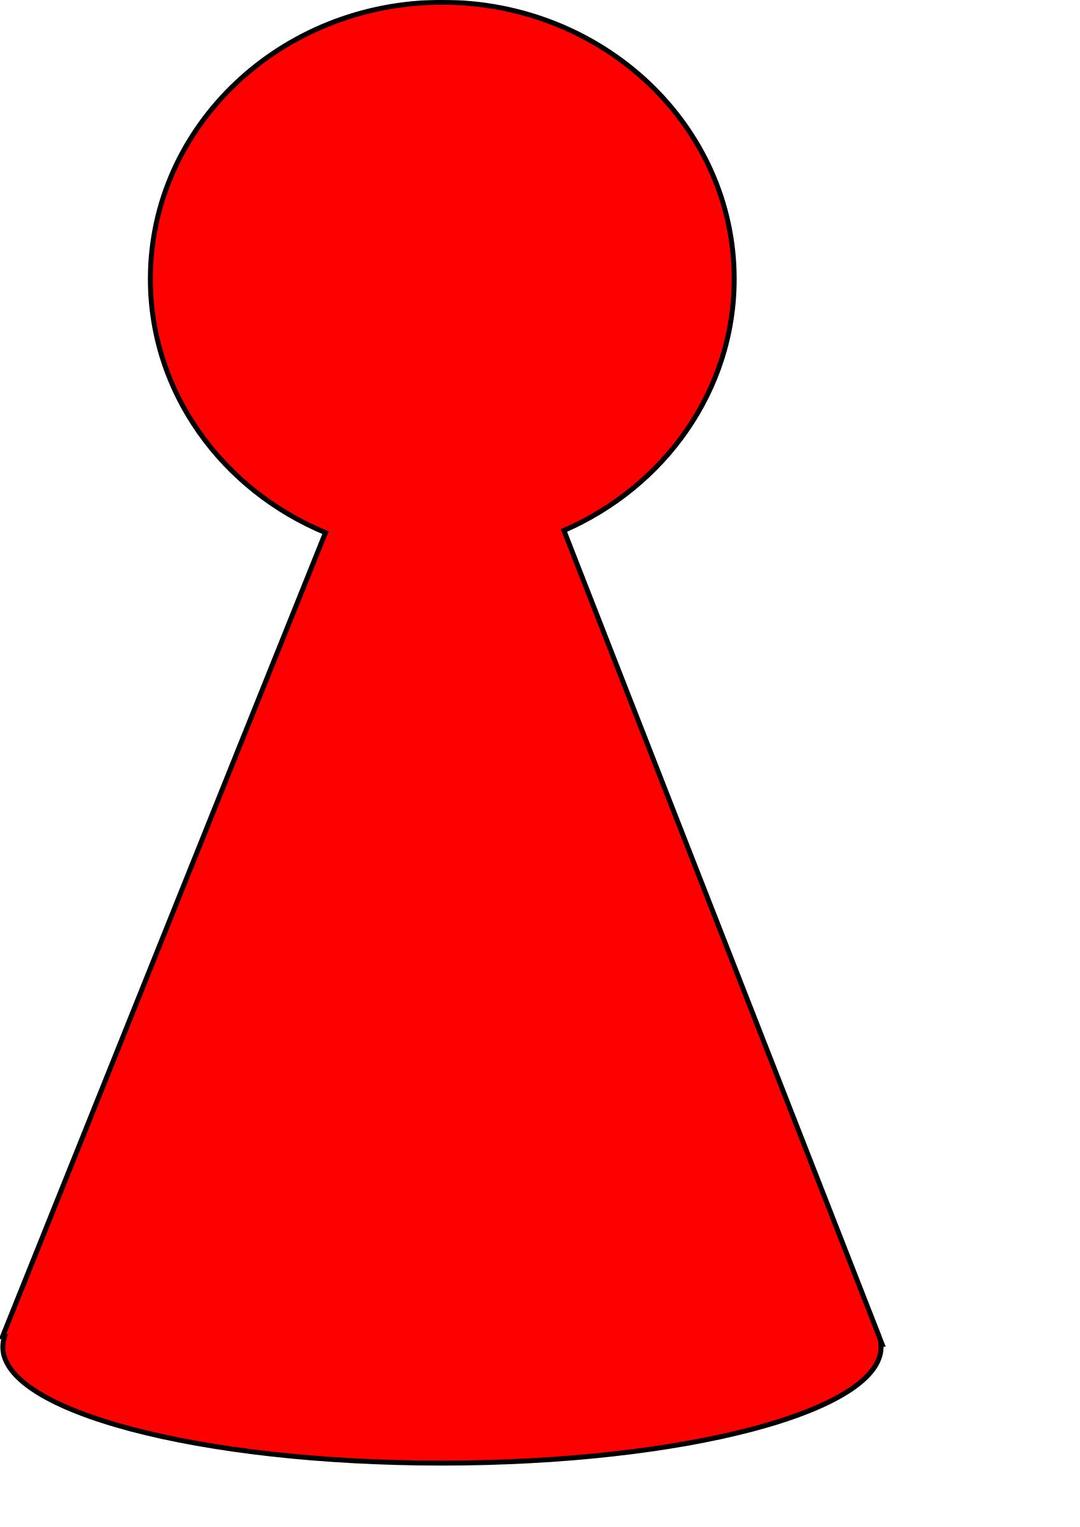 Ludo Piece - Scarlett Red png transparent